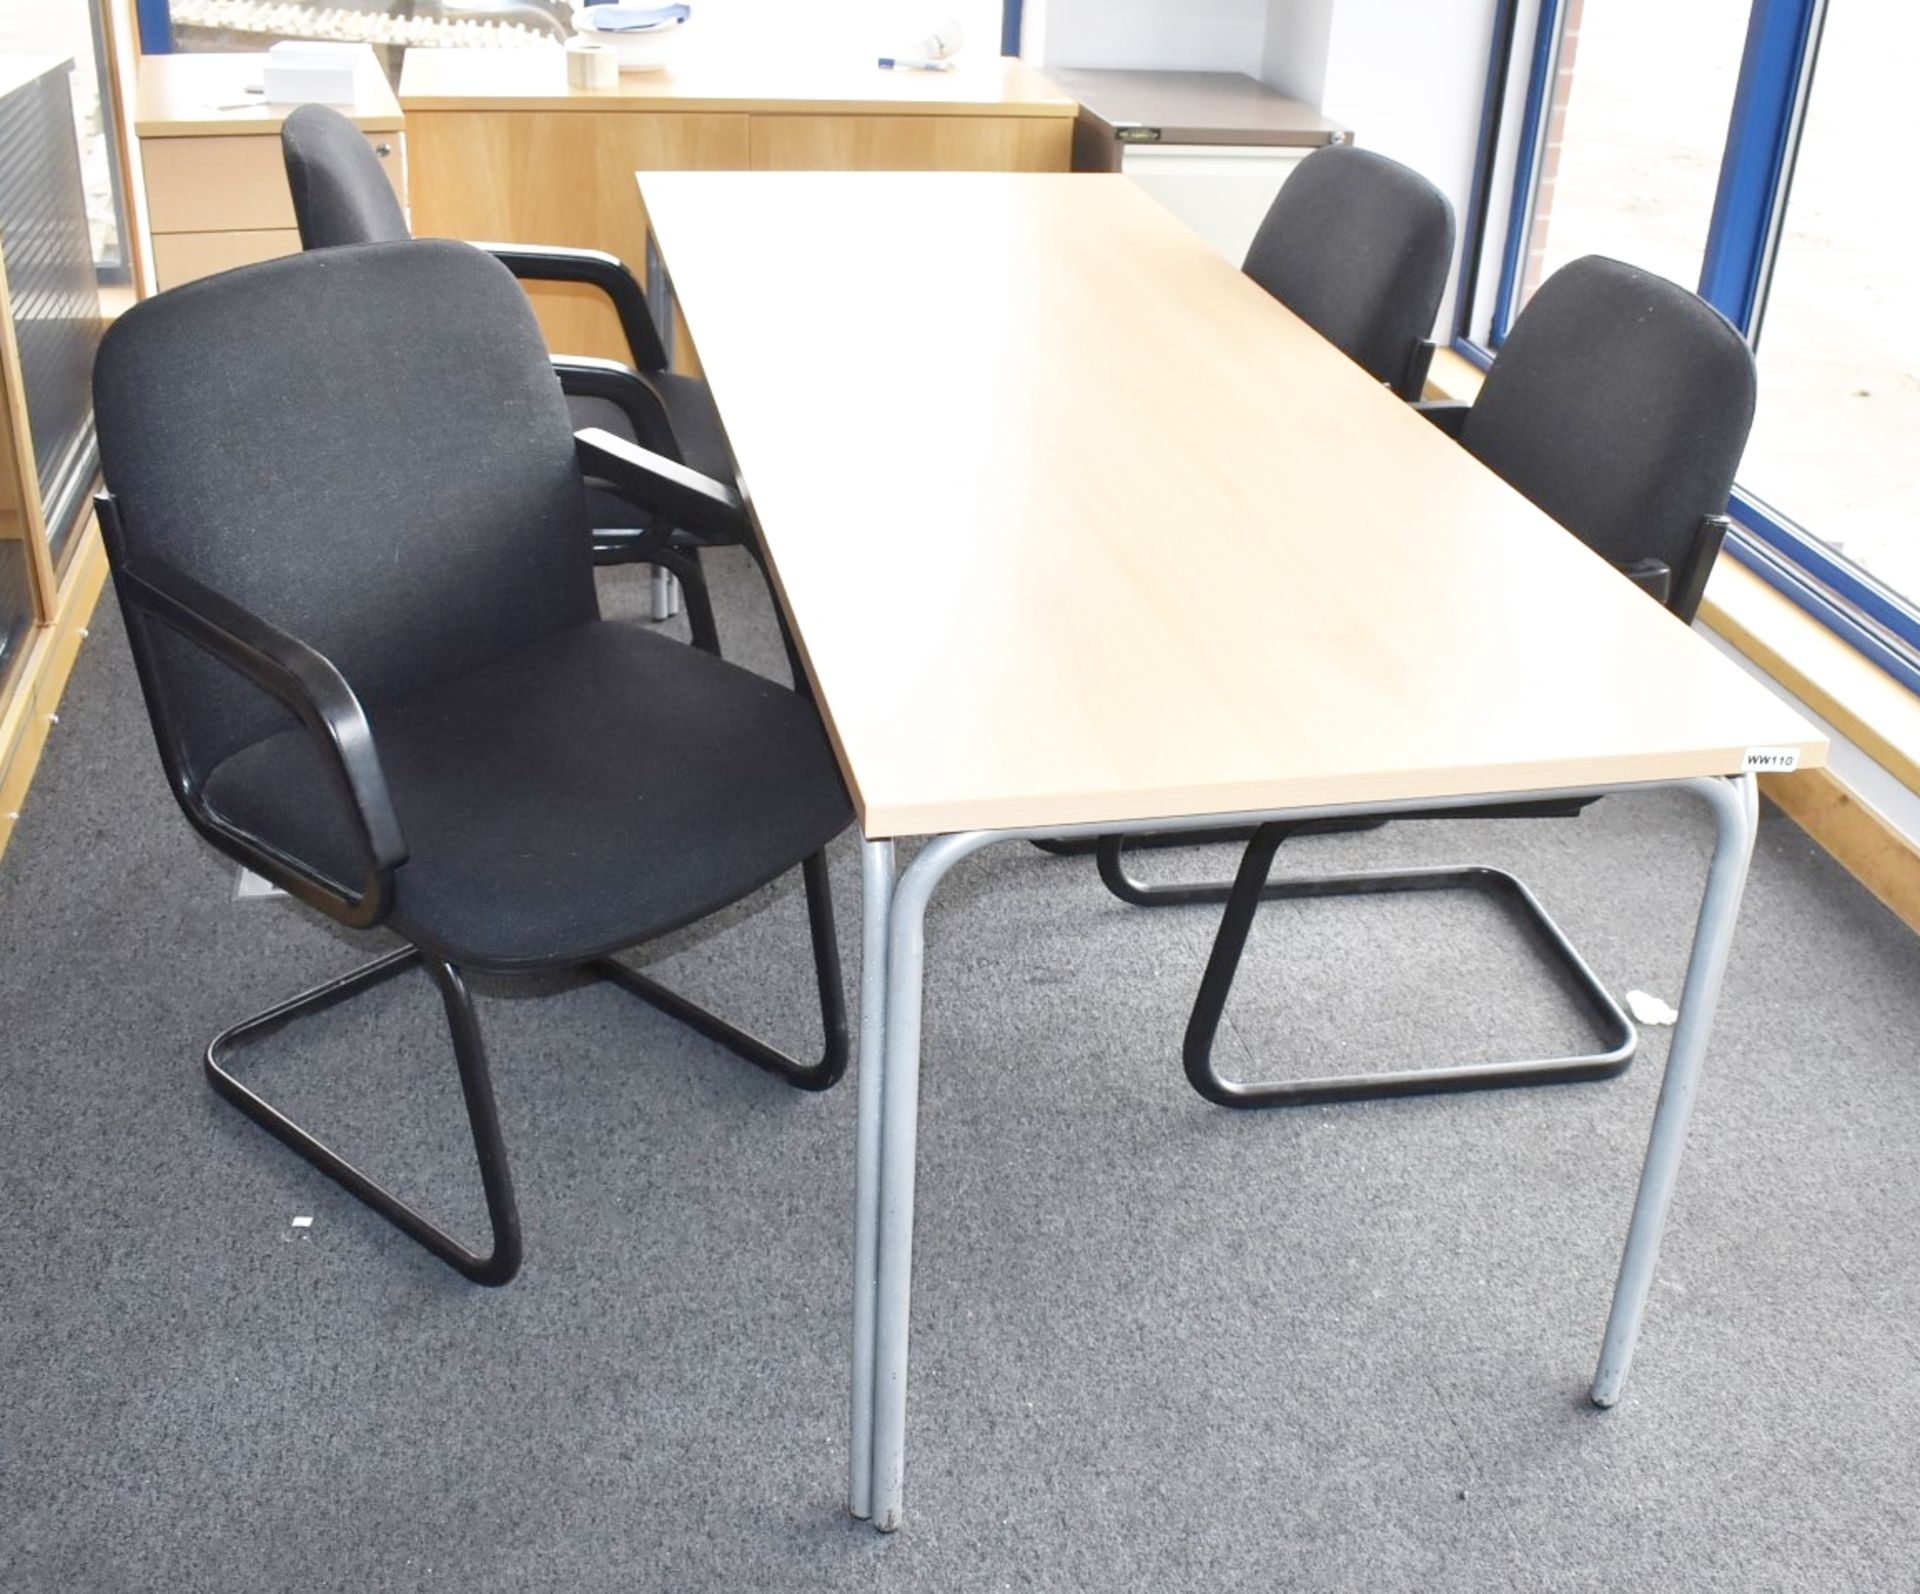 1 x Boardroom Meeting Table om Beech With 4 x Grey Fabric Chairs - Ref WW110 - H76 x W200 x D76